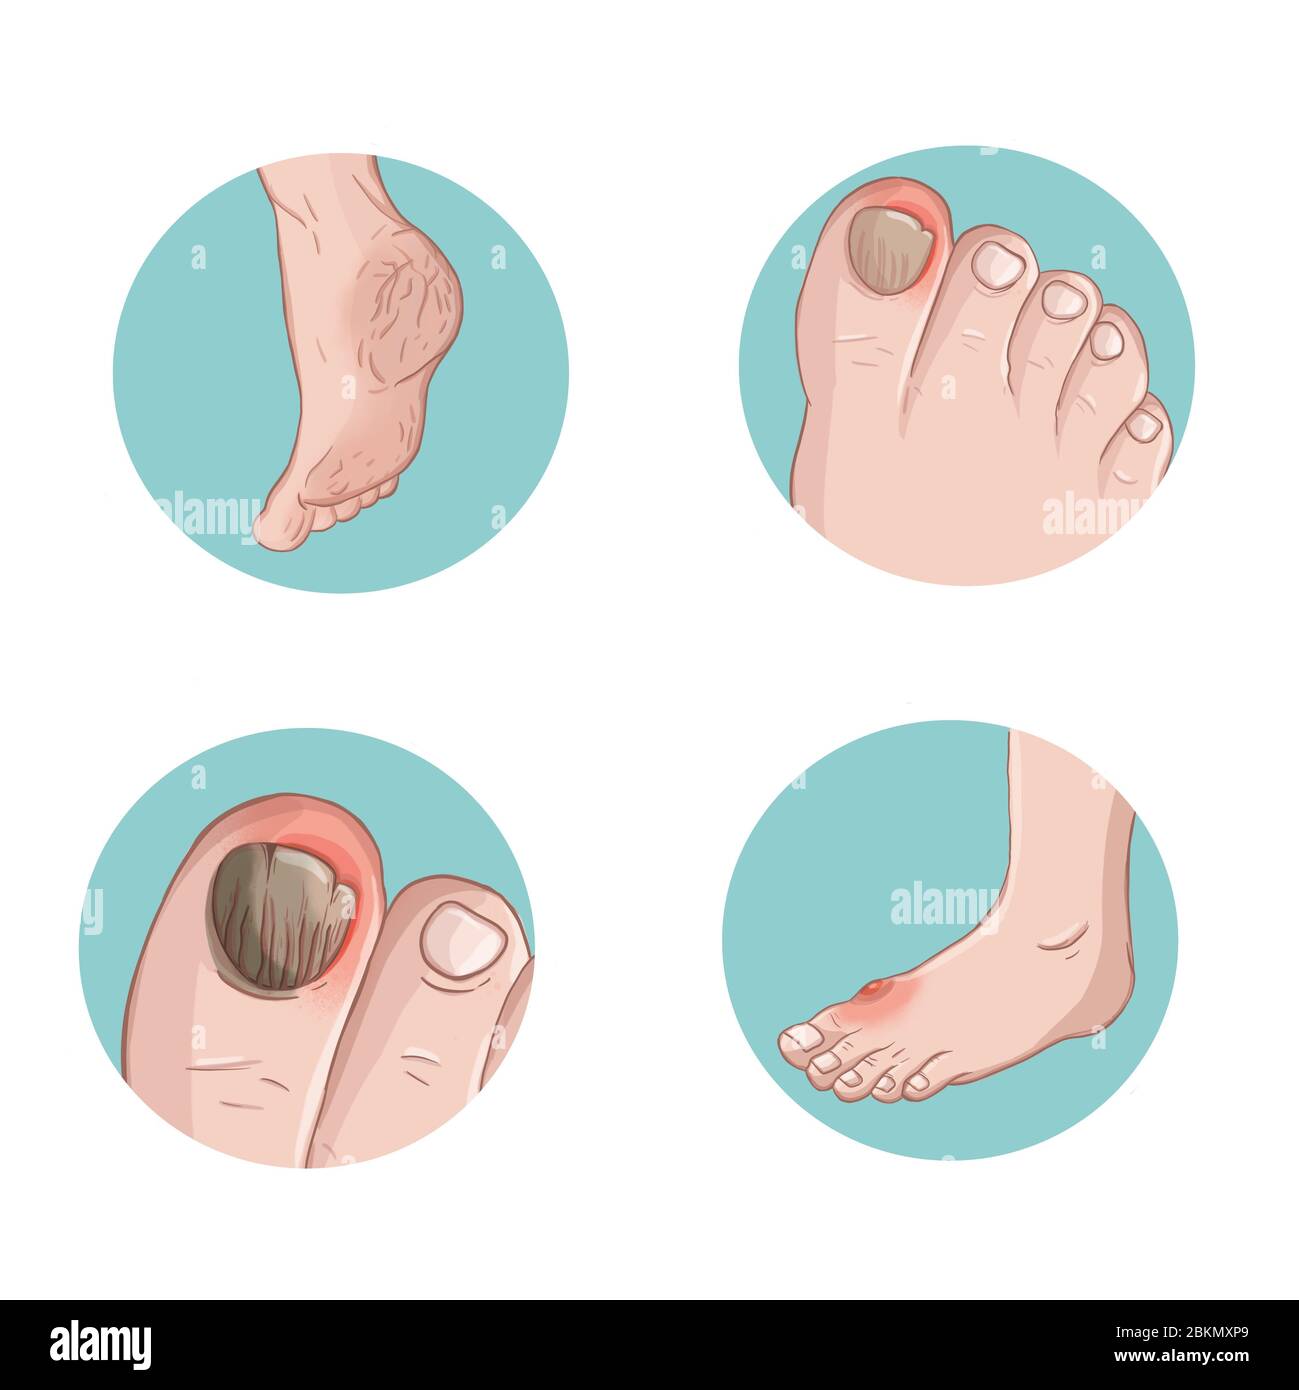 A human leg with sores and problems is depicted in fragments in circles Stock Photo